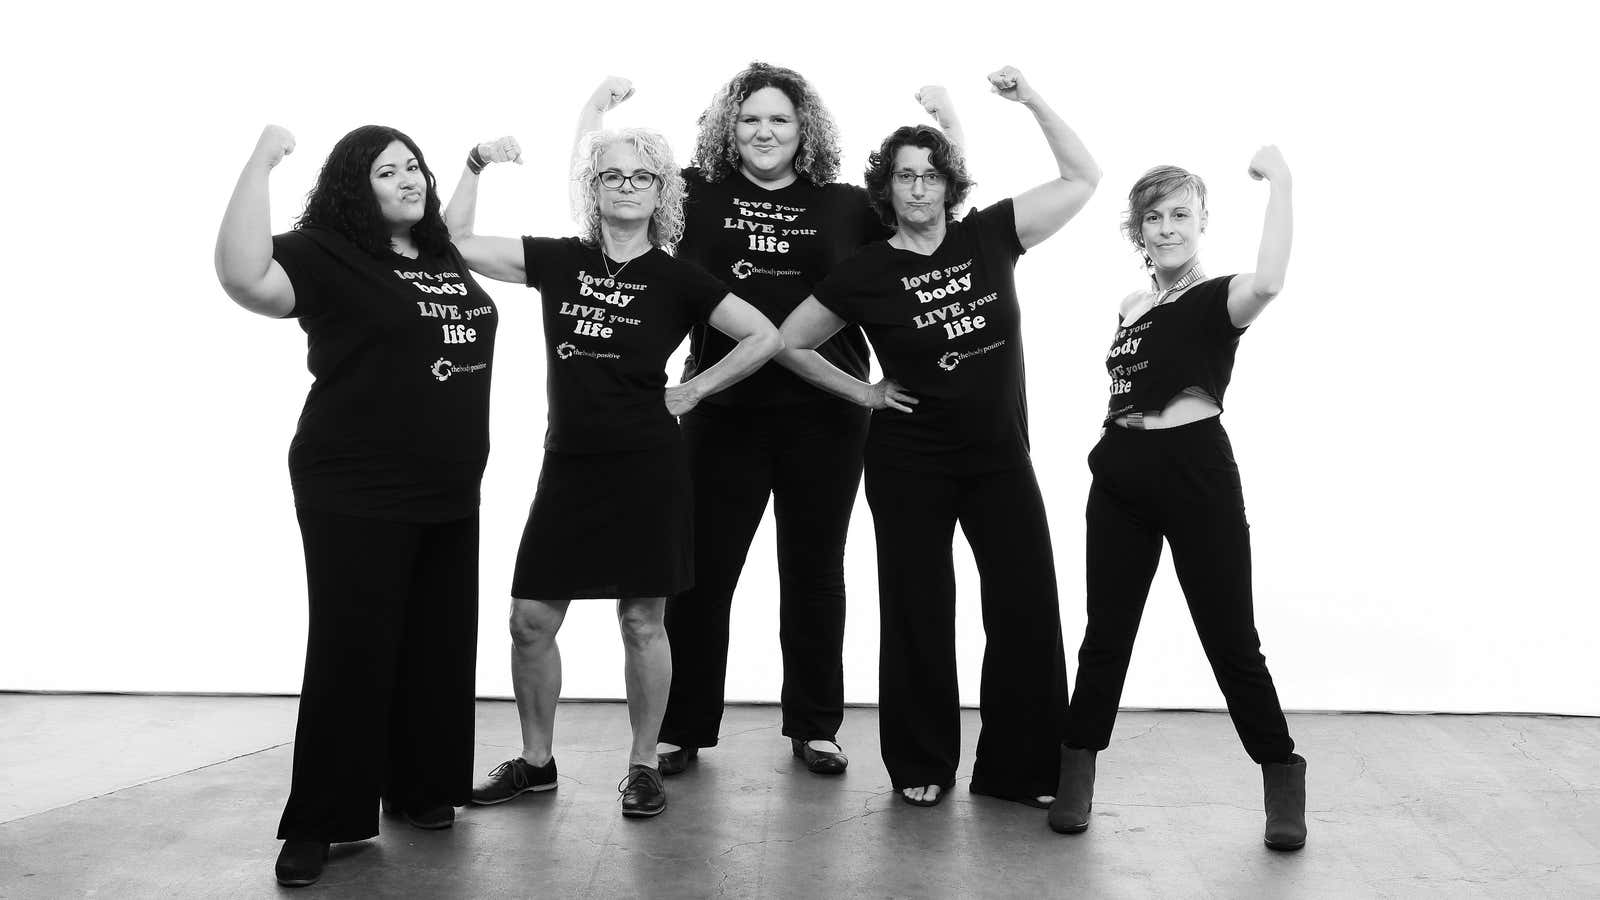 Connie Sobczak and Elizabeth Scott (elbow-to-elbow in center) founded The Body Positive to help people live peacefully in their bodies.